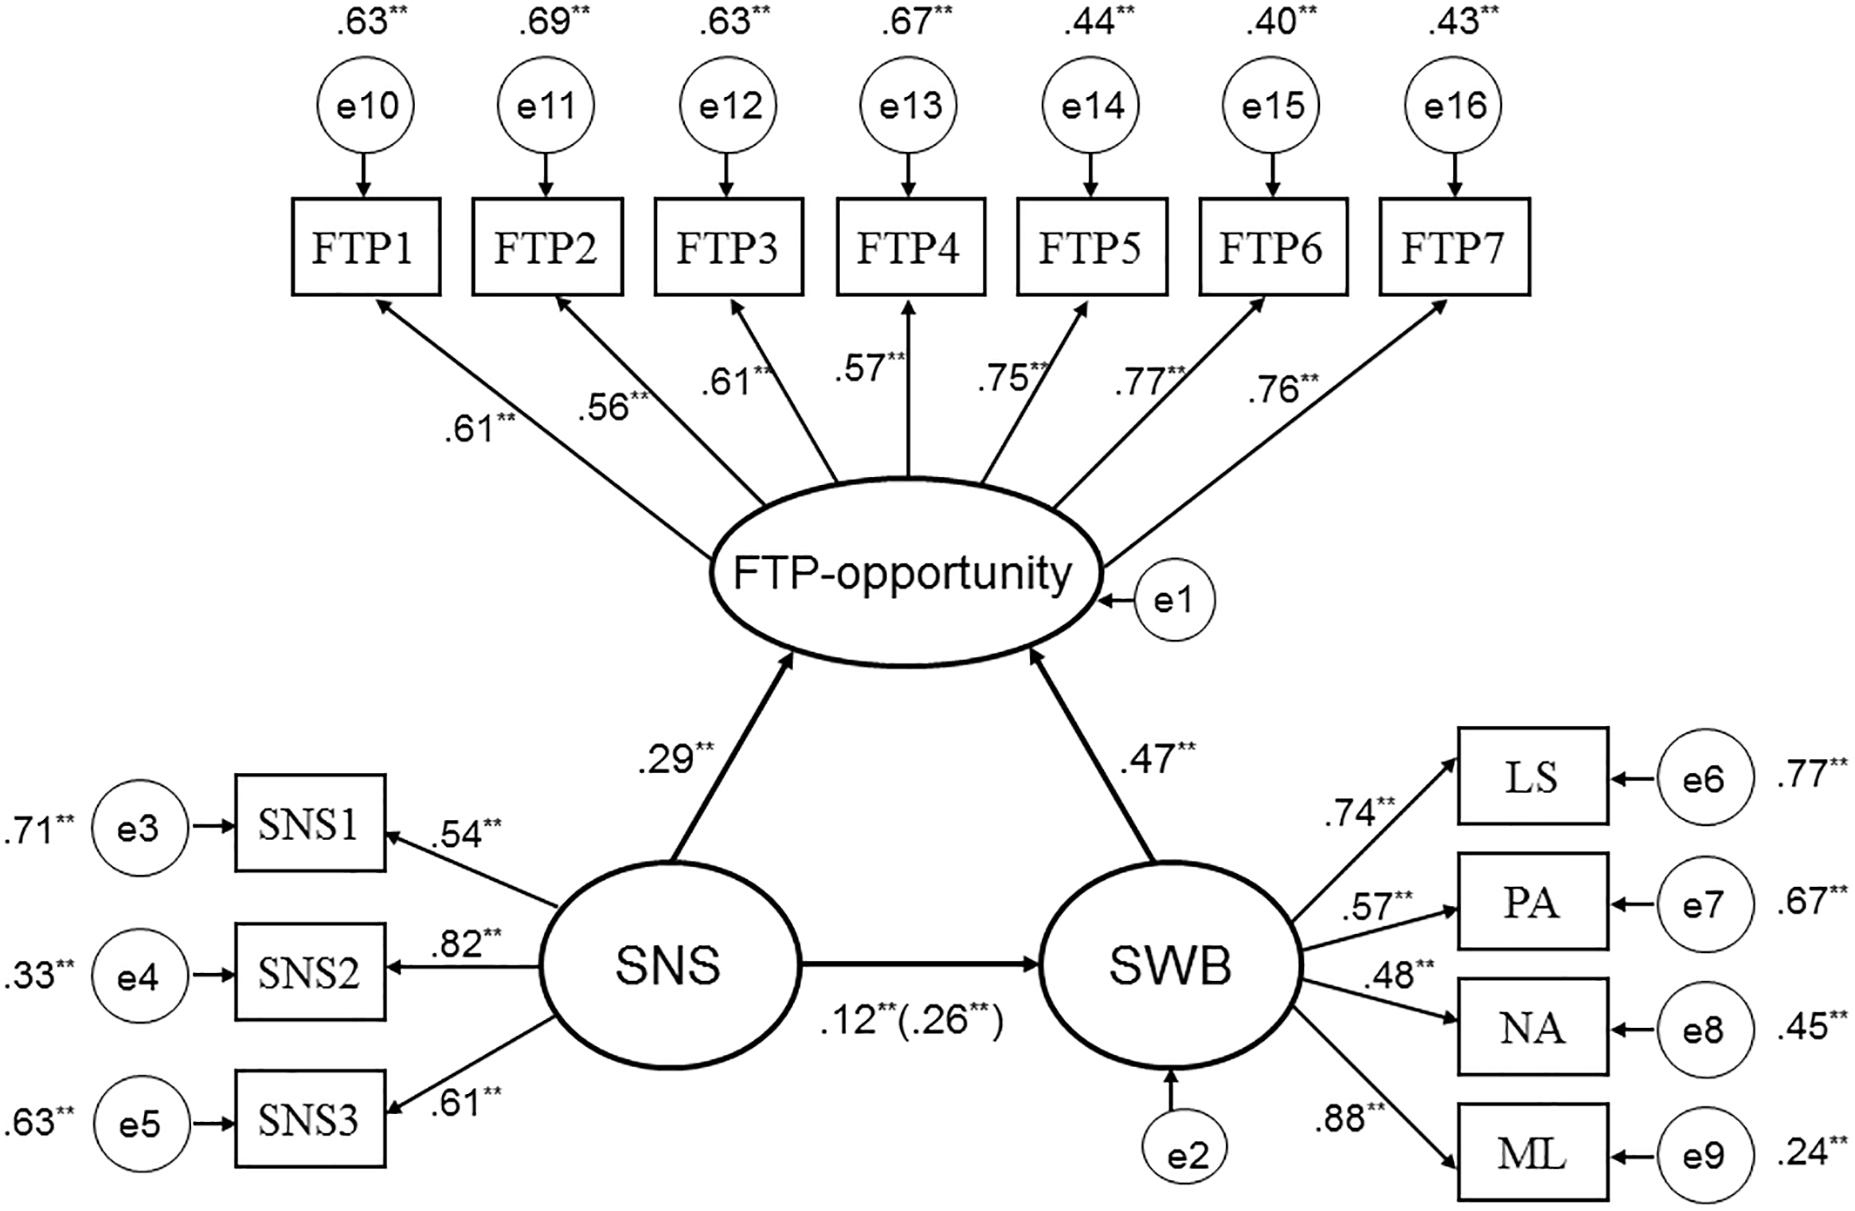 Descriptive statistics of the SMWEB meaningful dimensions in the First